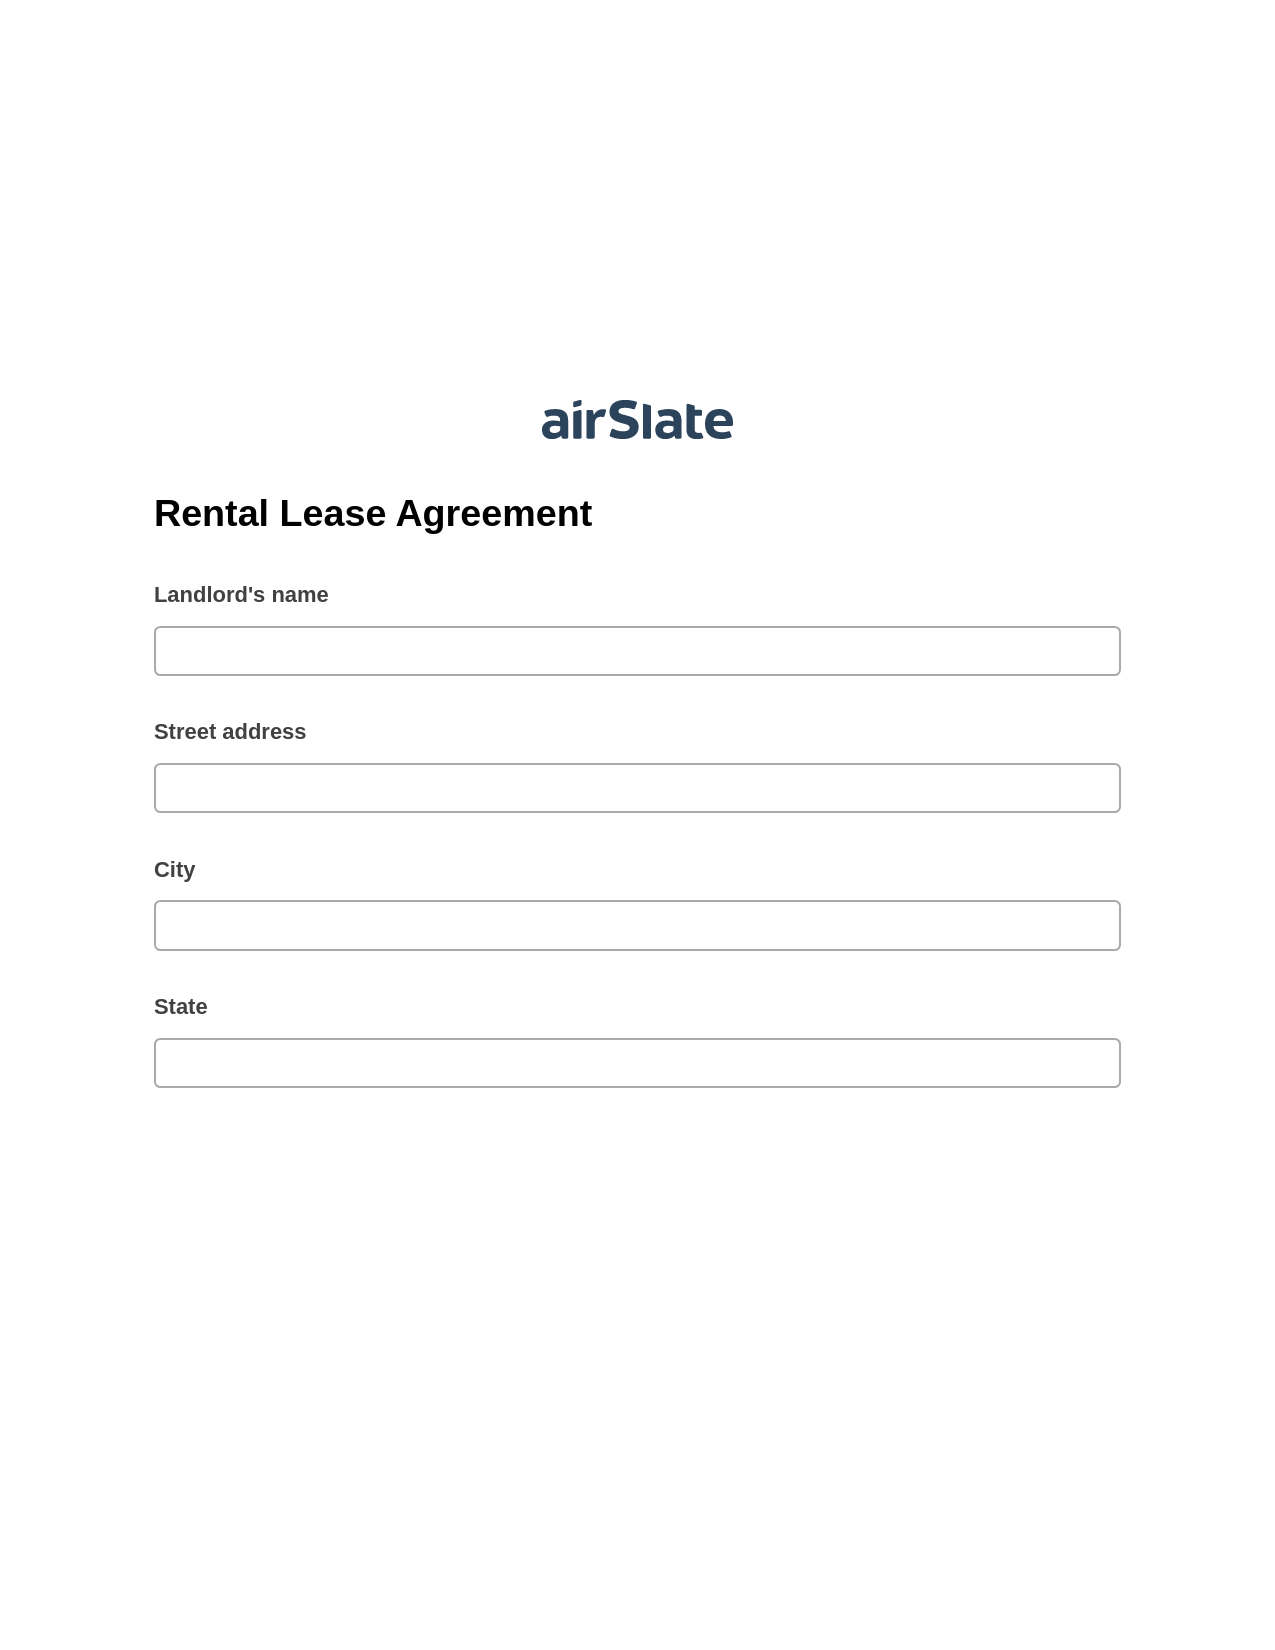 Rental Lease Agreement Pre-fill from Salesforce Records with SOQL Bot, Jira Bot, Box Bot